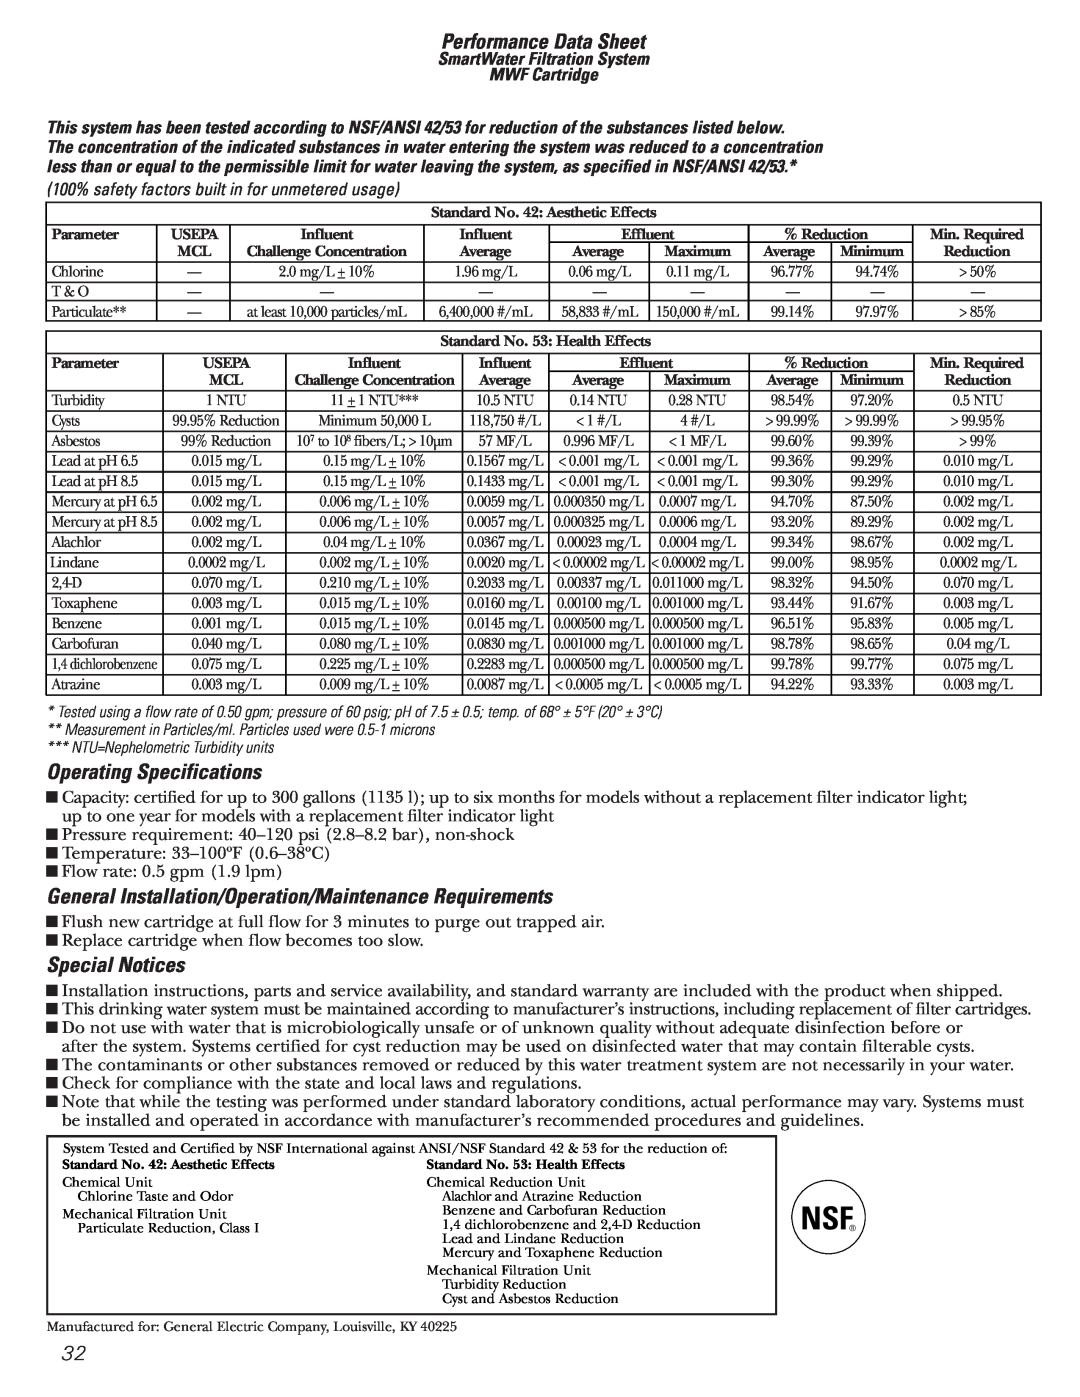 GE Monogram 23 installation instructions Performance Data Sheet, Operating Specifications, Special Notices 